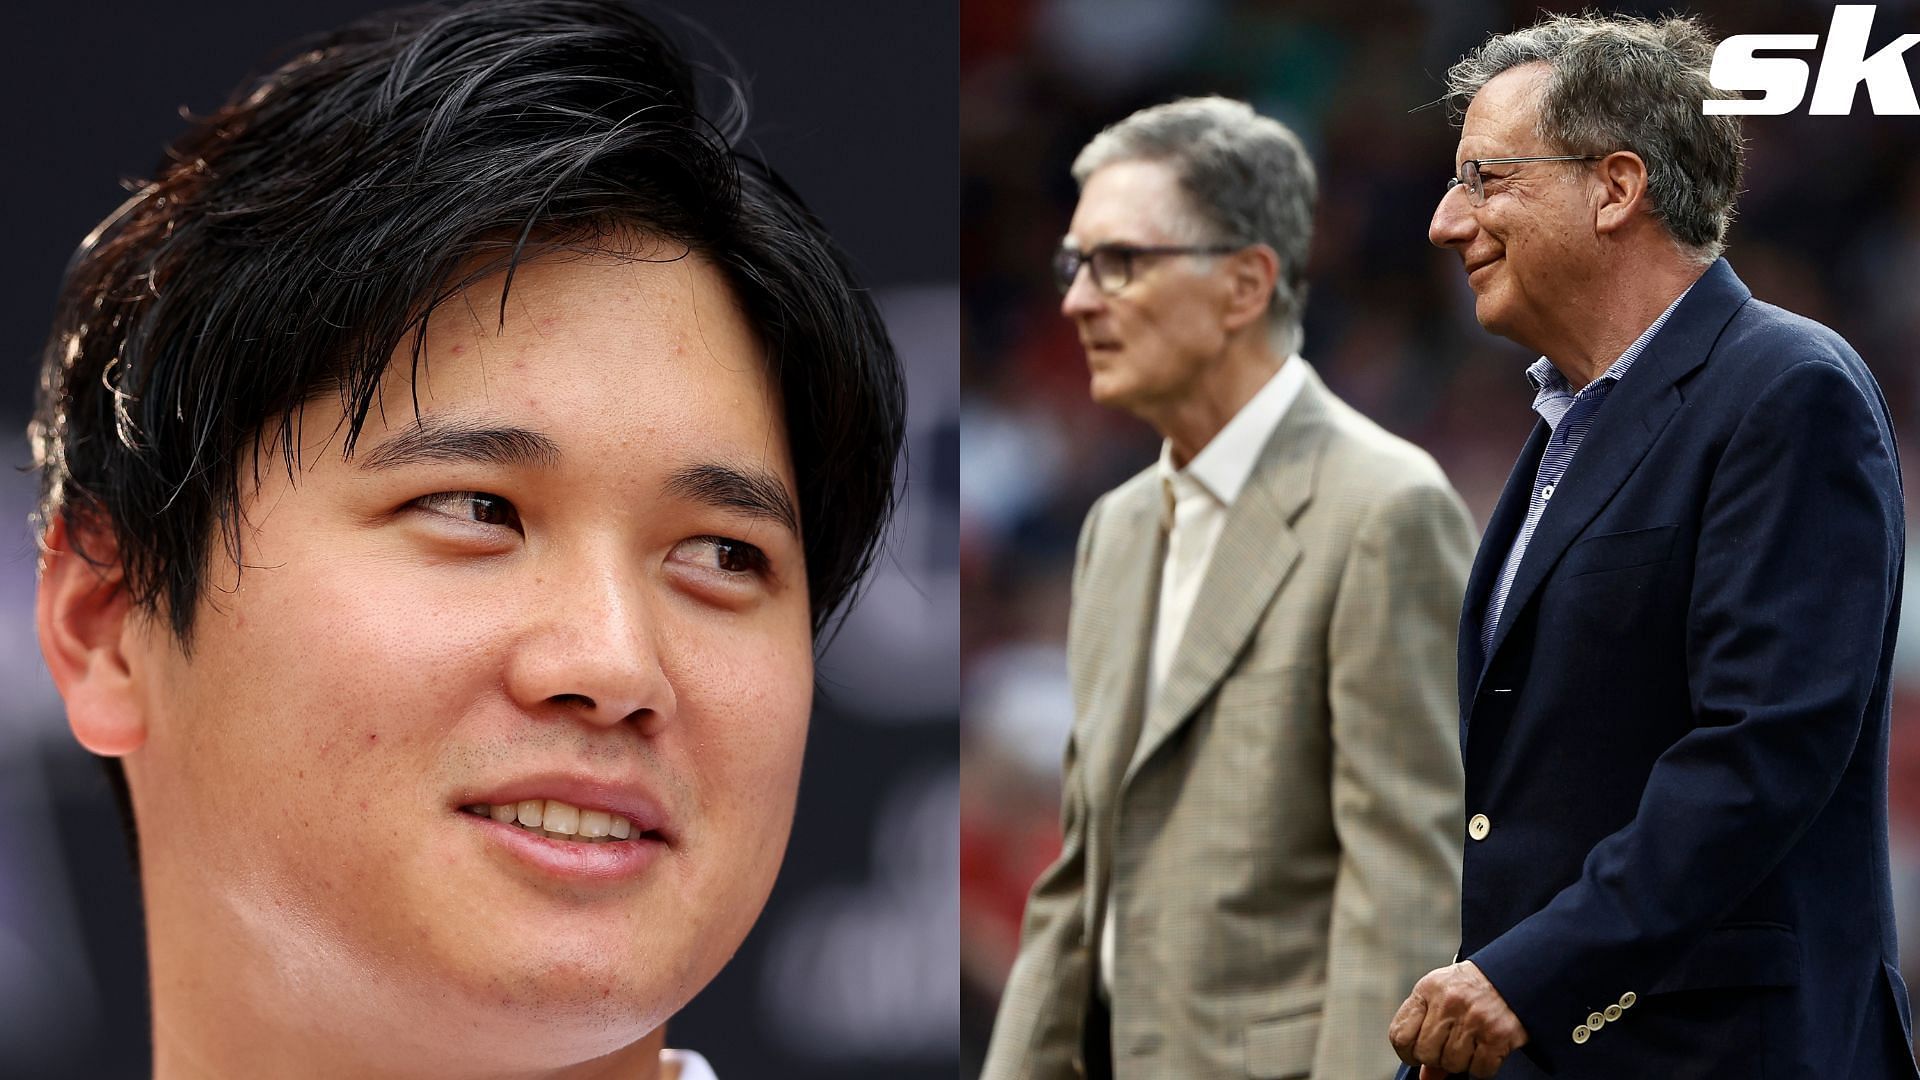 An MLB insider thinks Shohei Ohtani could go to Boston